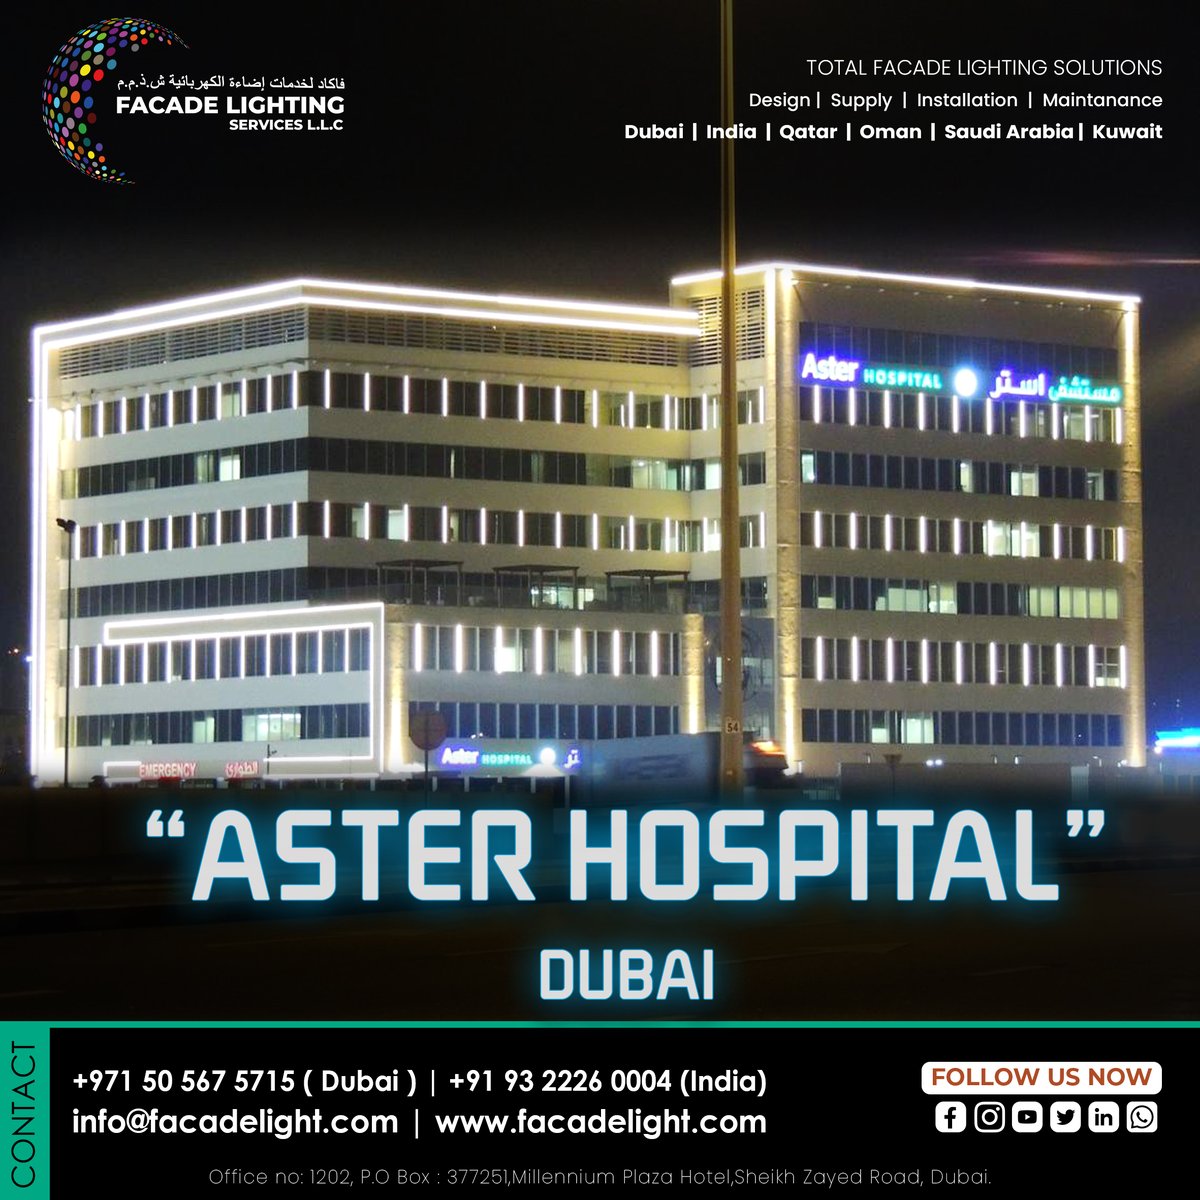 We're proud to showcase our latest #project at #asterhospital, where we've designed a stunning #facadelighting system that enhances its #architectural beauty.

#facadelighting #lightingmanufacturer #lightinginstallation #facadelightingservice #asterhospitaldubai #exteriorlighting